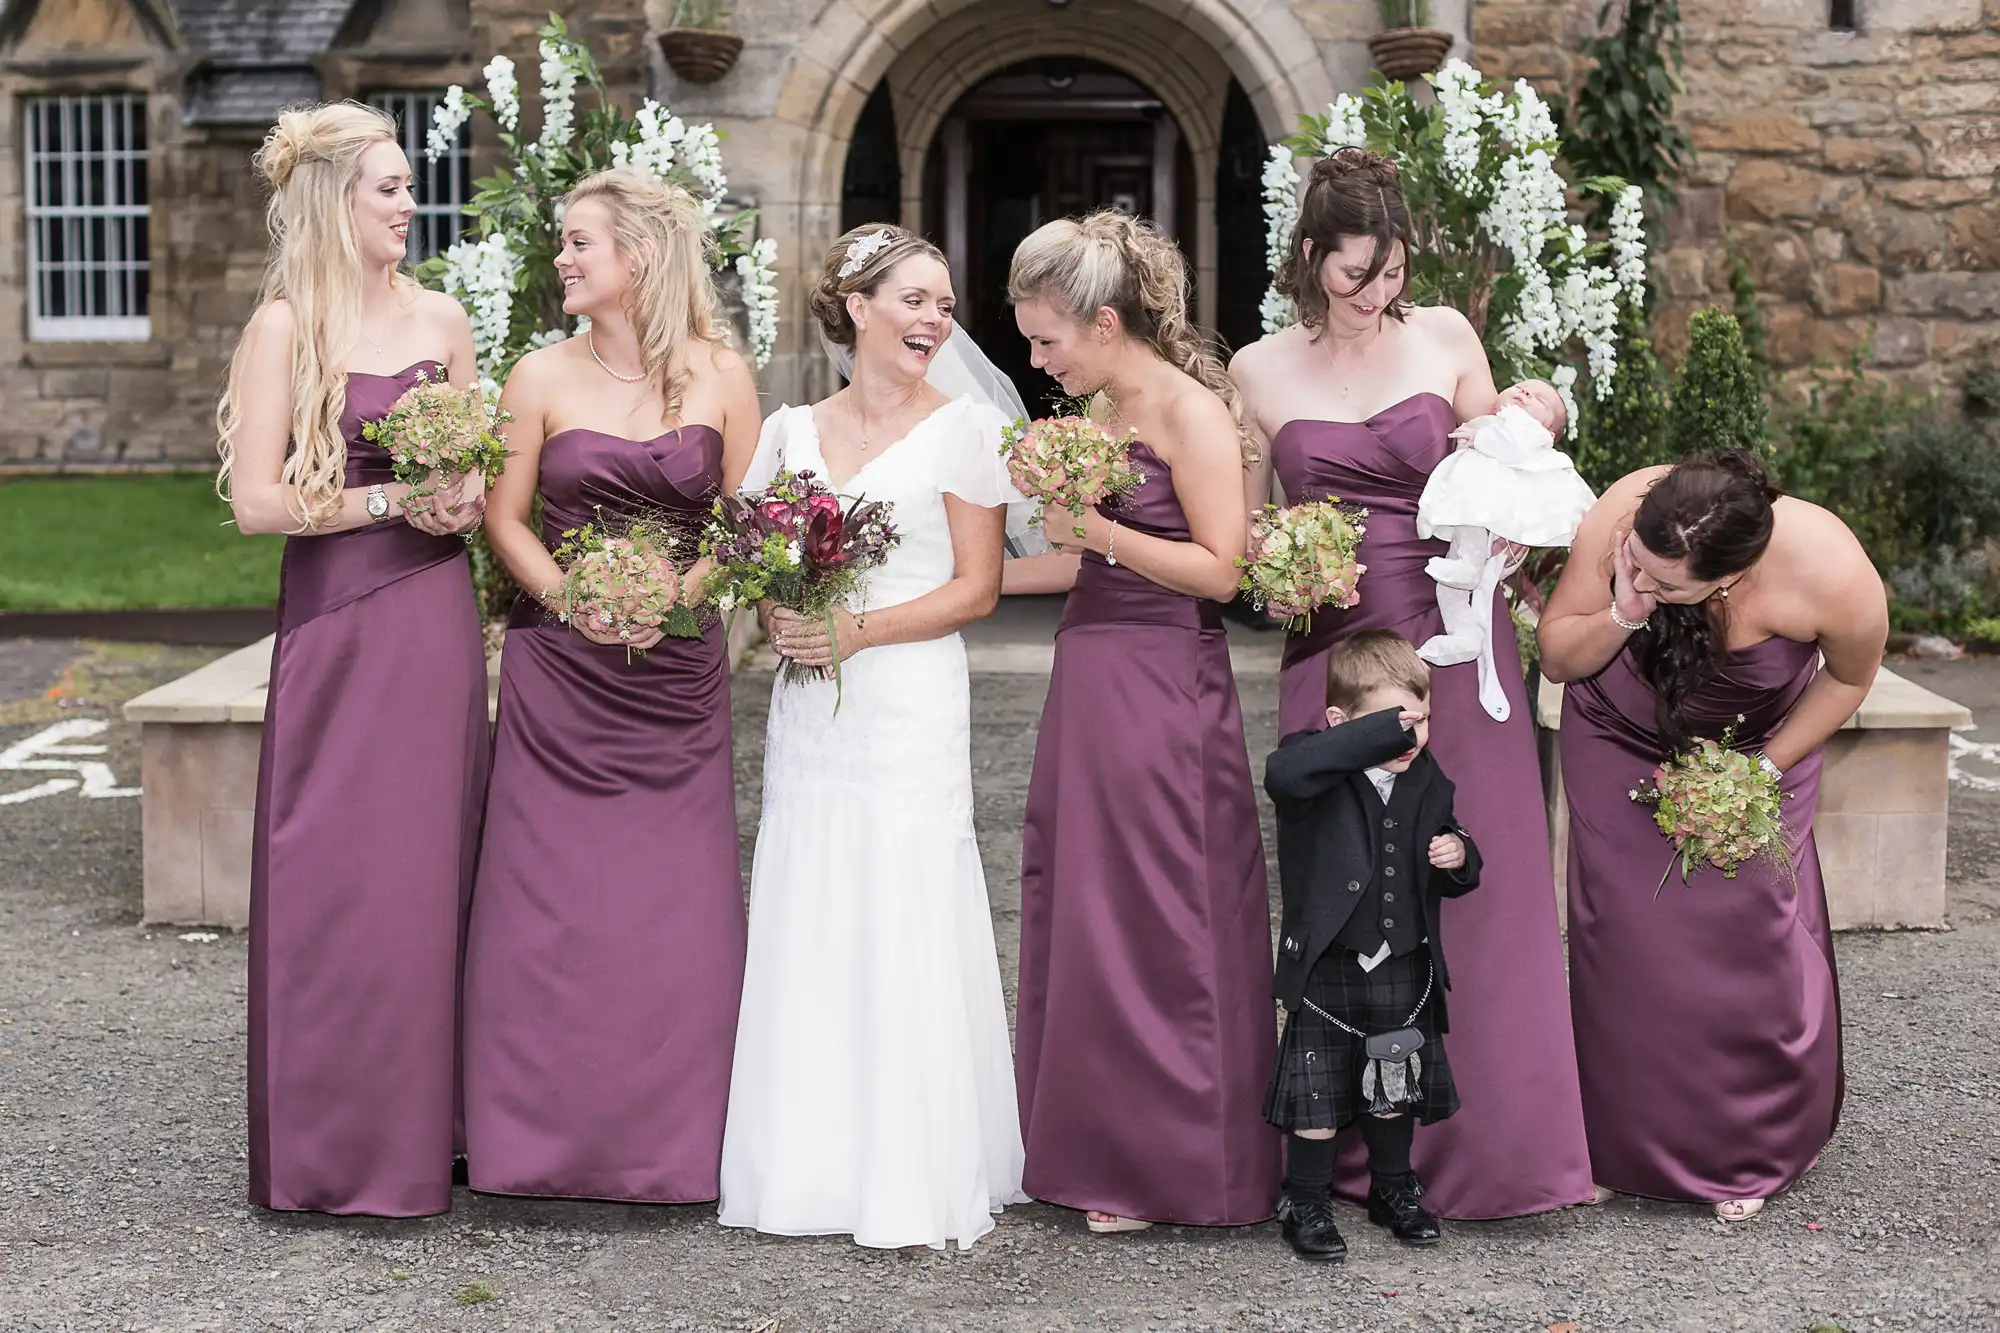 Five bridesmaids in purple dresses and a bride in white laugh together, while a young boy in a kilt peeks through one bridesmaid's legs.